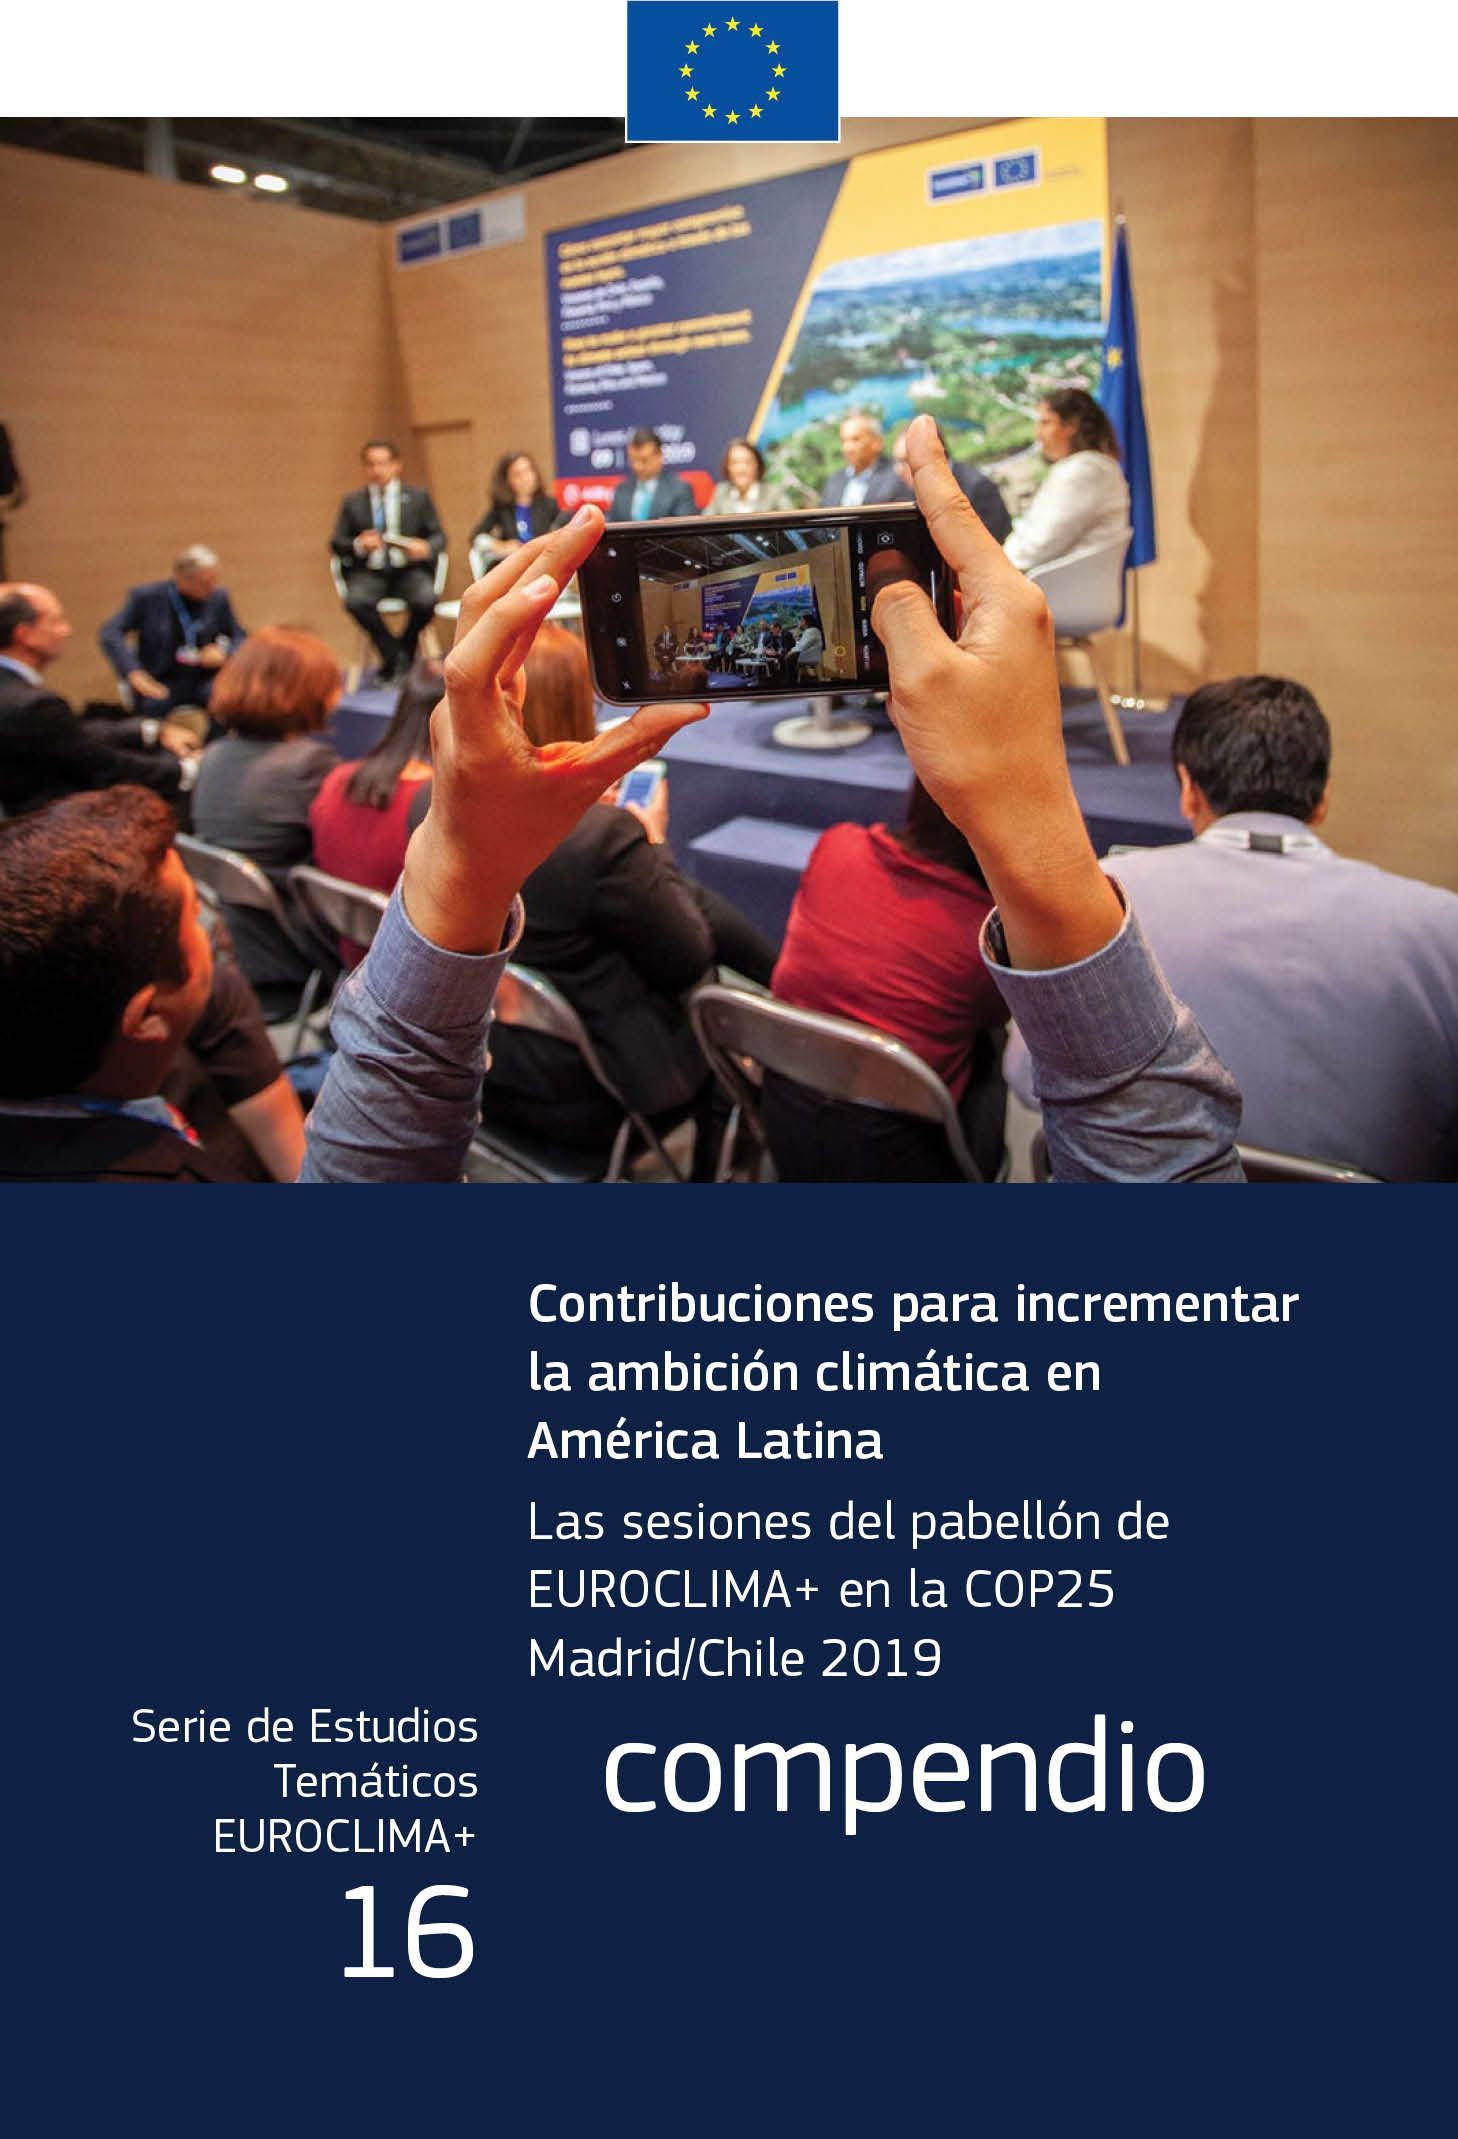 Contributions for increasing climate ambition in Latin America 